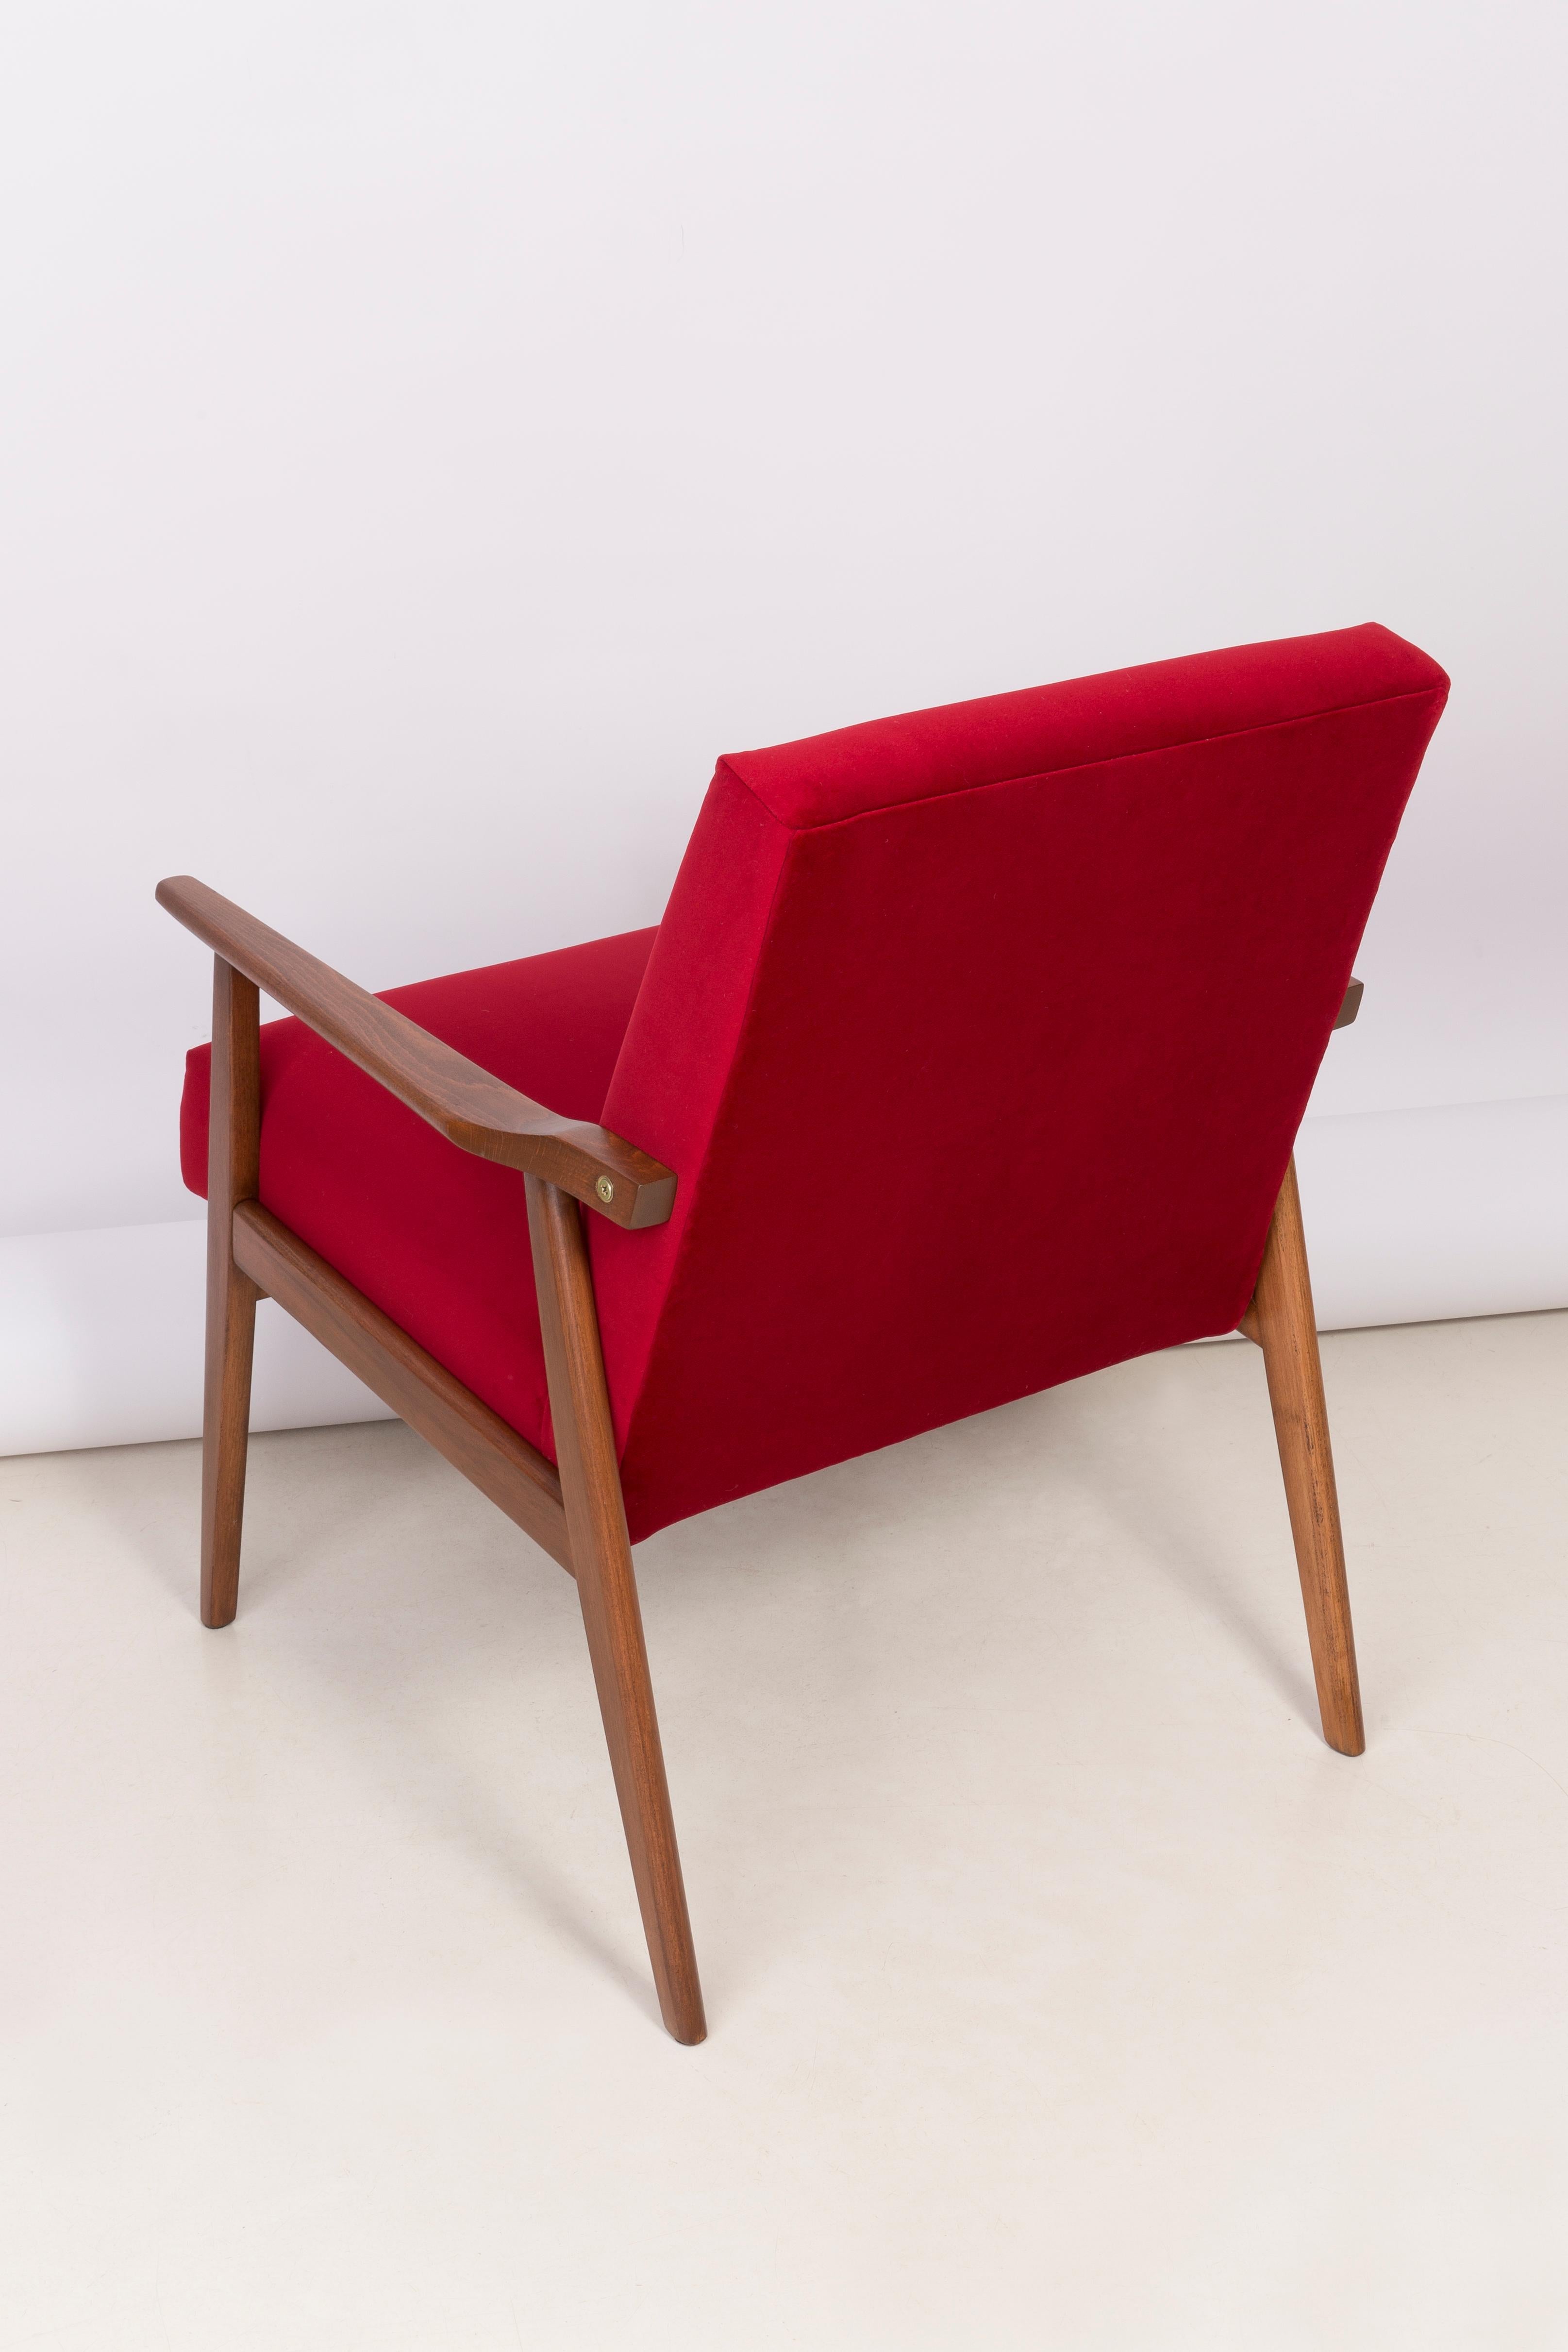 Set of Four Midcentury Red Velvet Dante Armchairs, Europe, 1960s For Sale 4